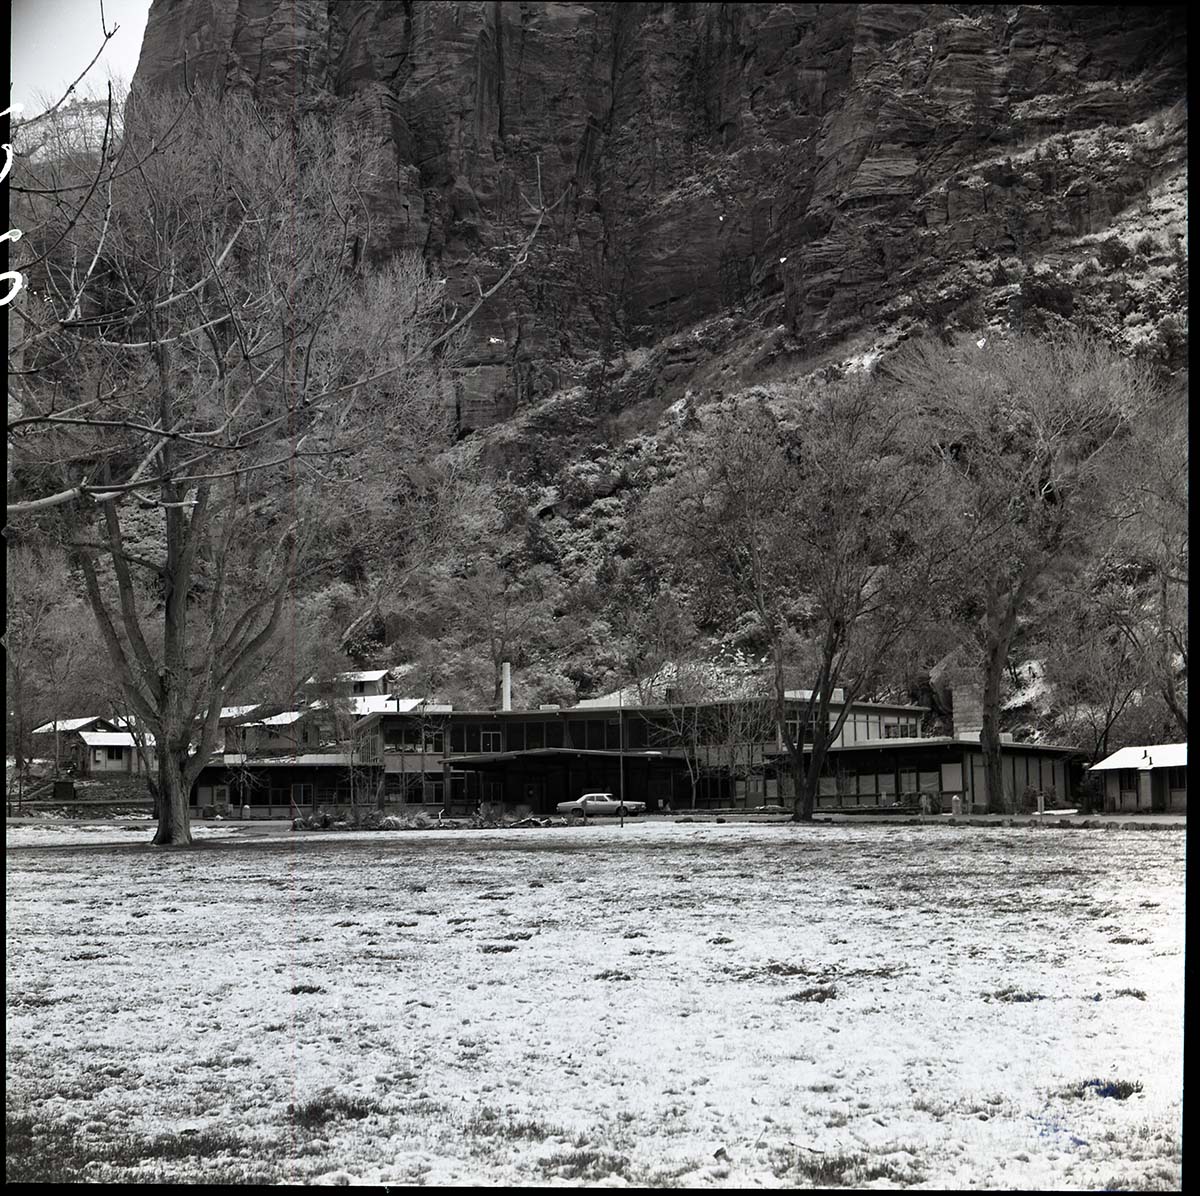 Main building at Zion Lodge for 1975 Environmental Impact Statement (EIS).